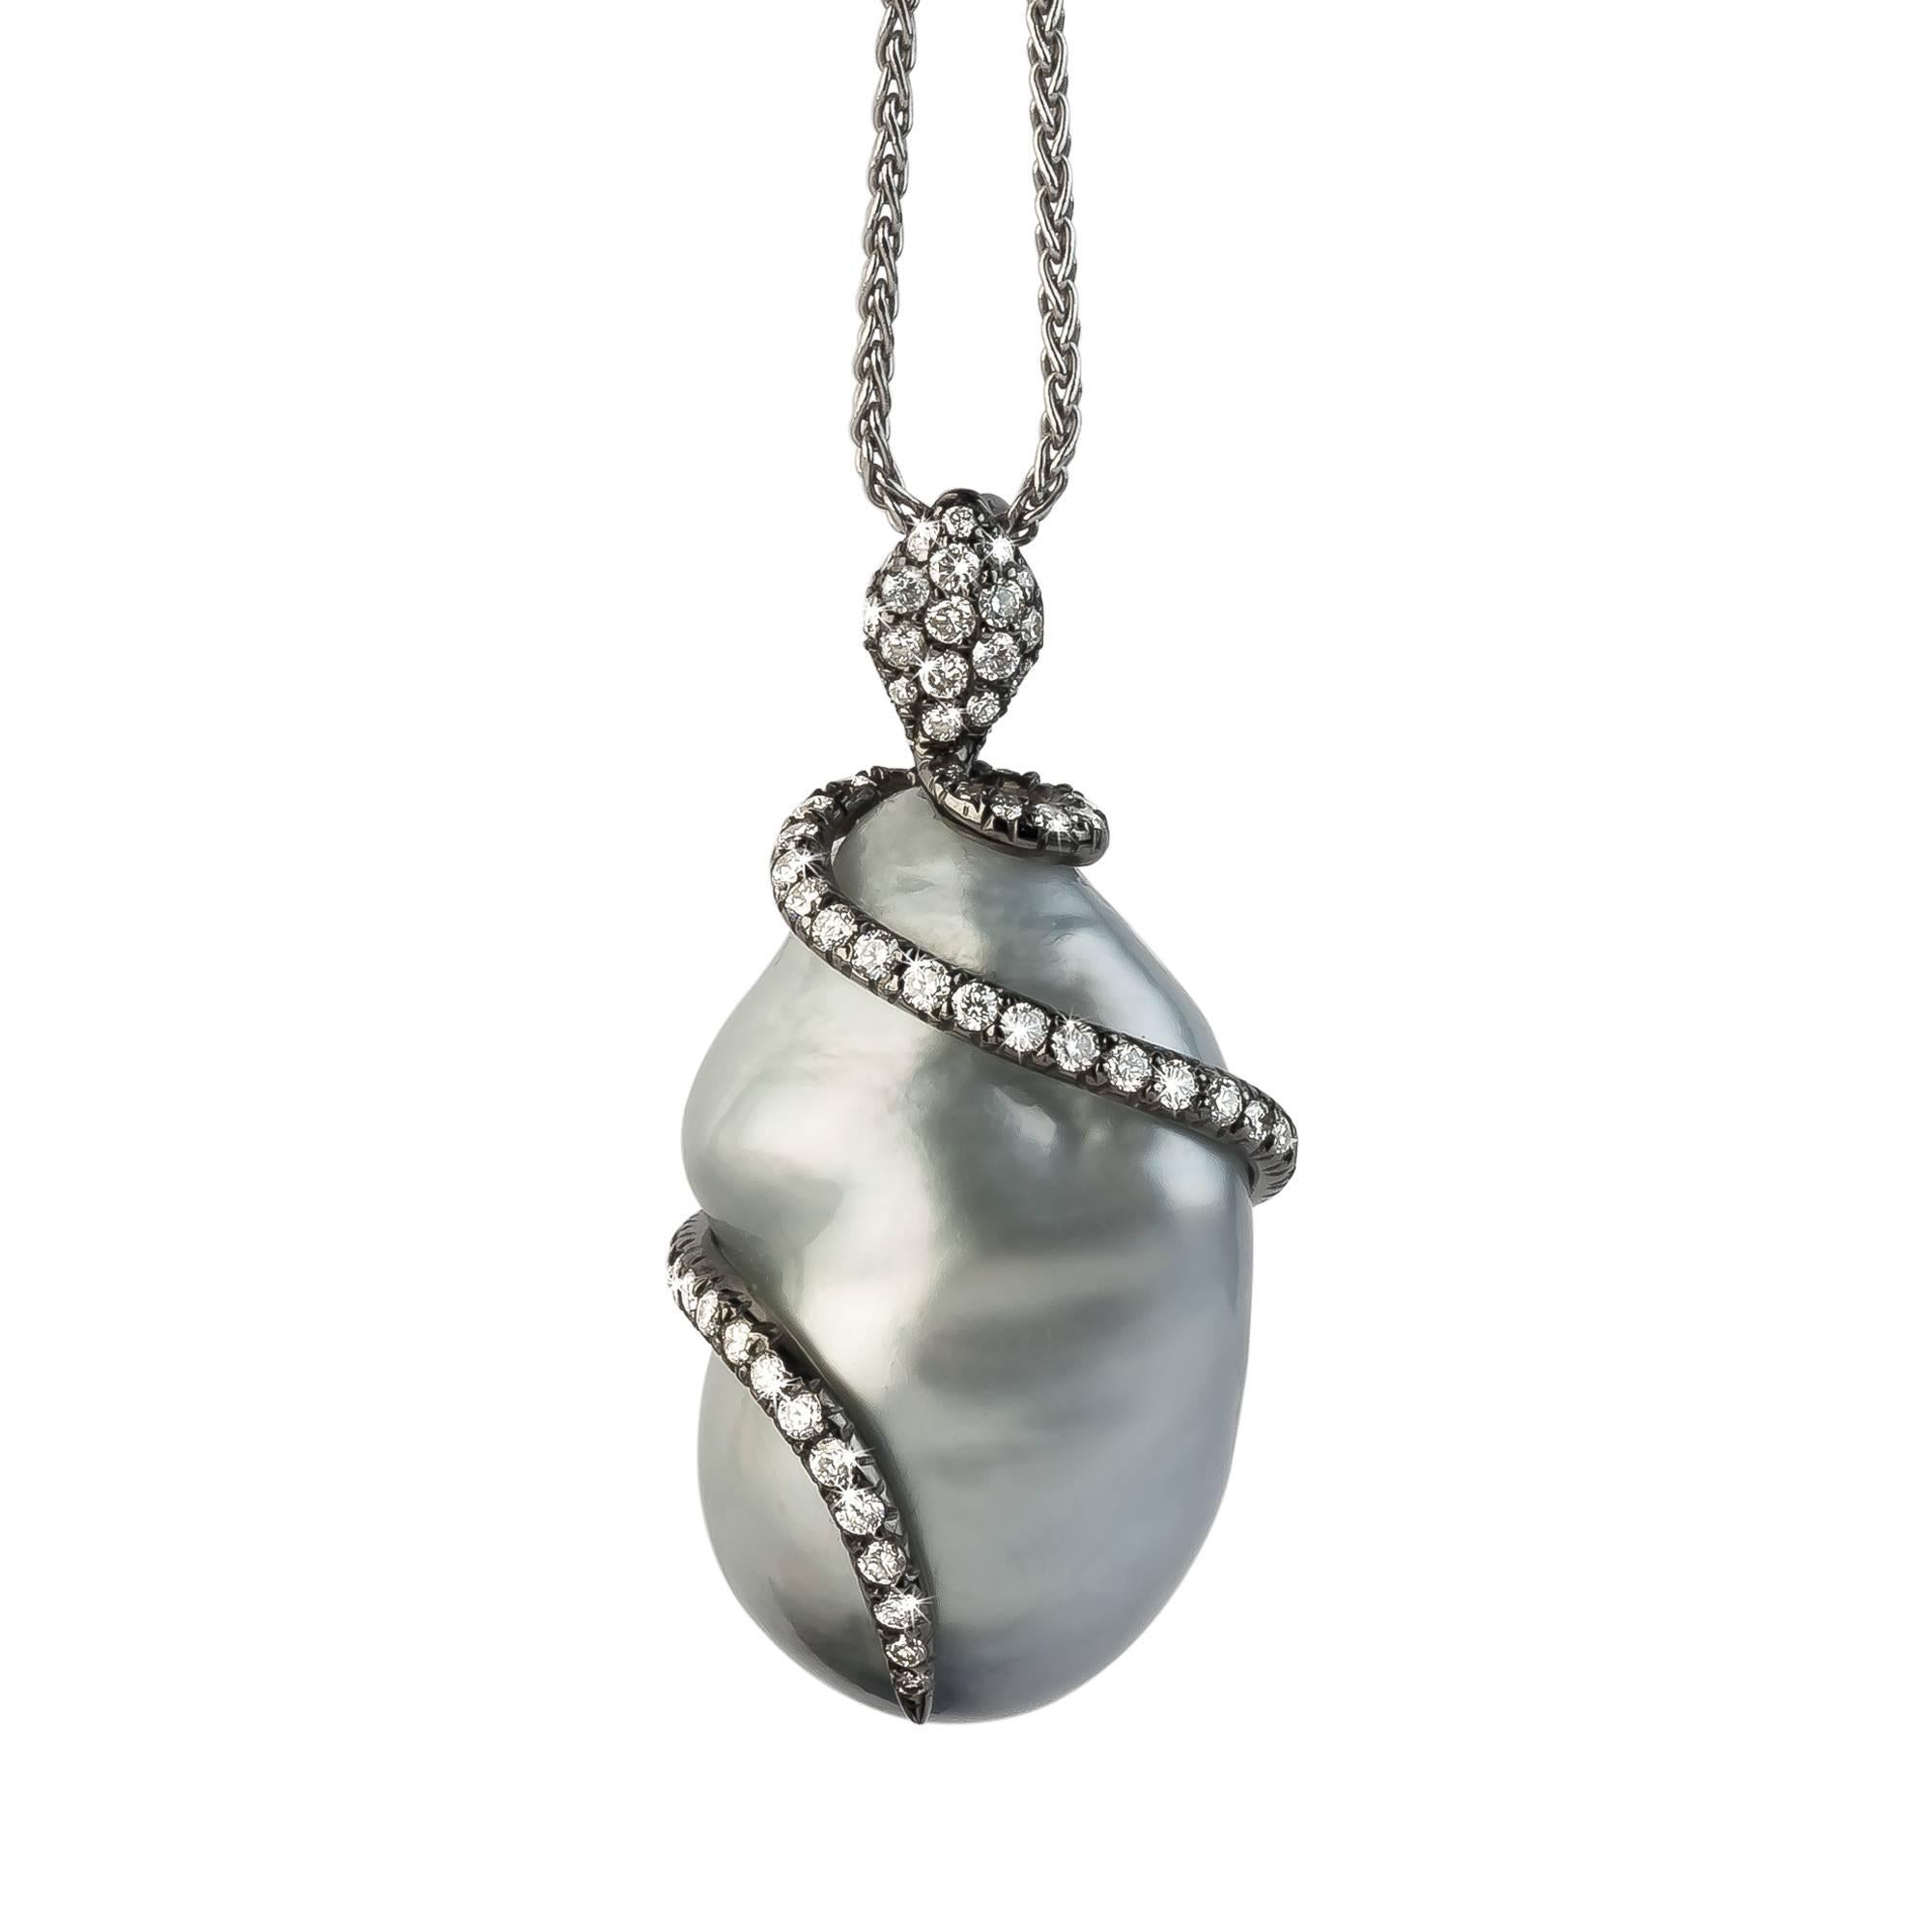 37.13 Carat Baroque Australian Pearl, Valadier Snake Pearl Pendant Necklace For Sale